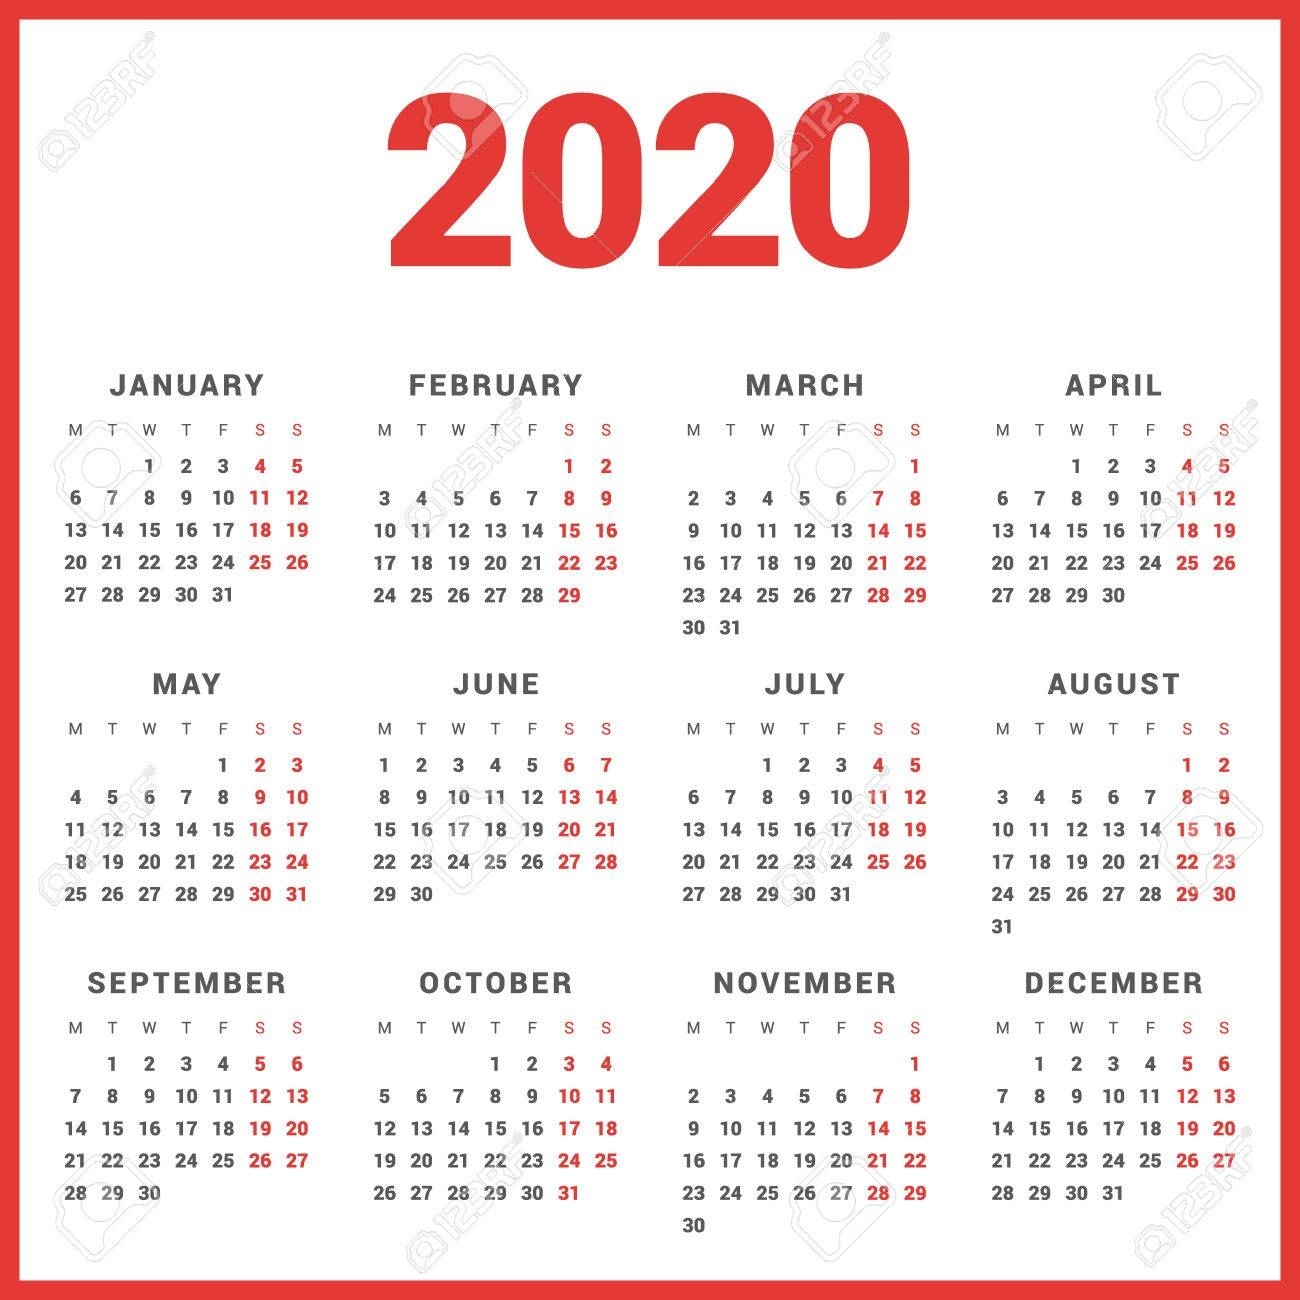 Monday Start Calendar 2020 - Colona.rsd7 Remarkable Blank Calendar 2020 Starting On Sunday With Week Numbers